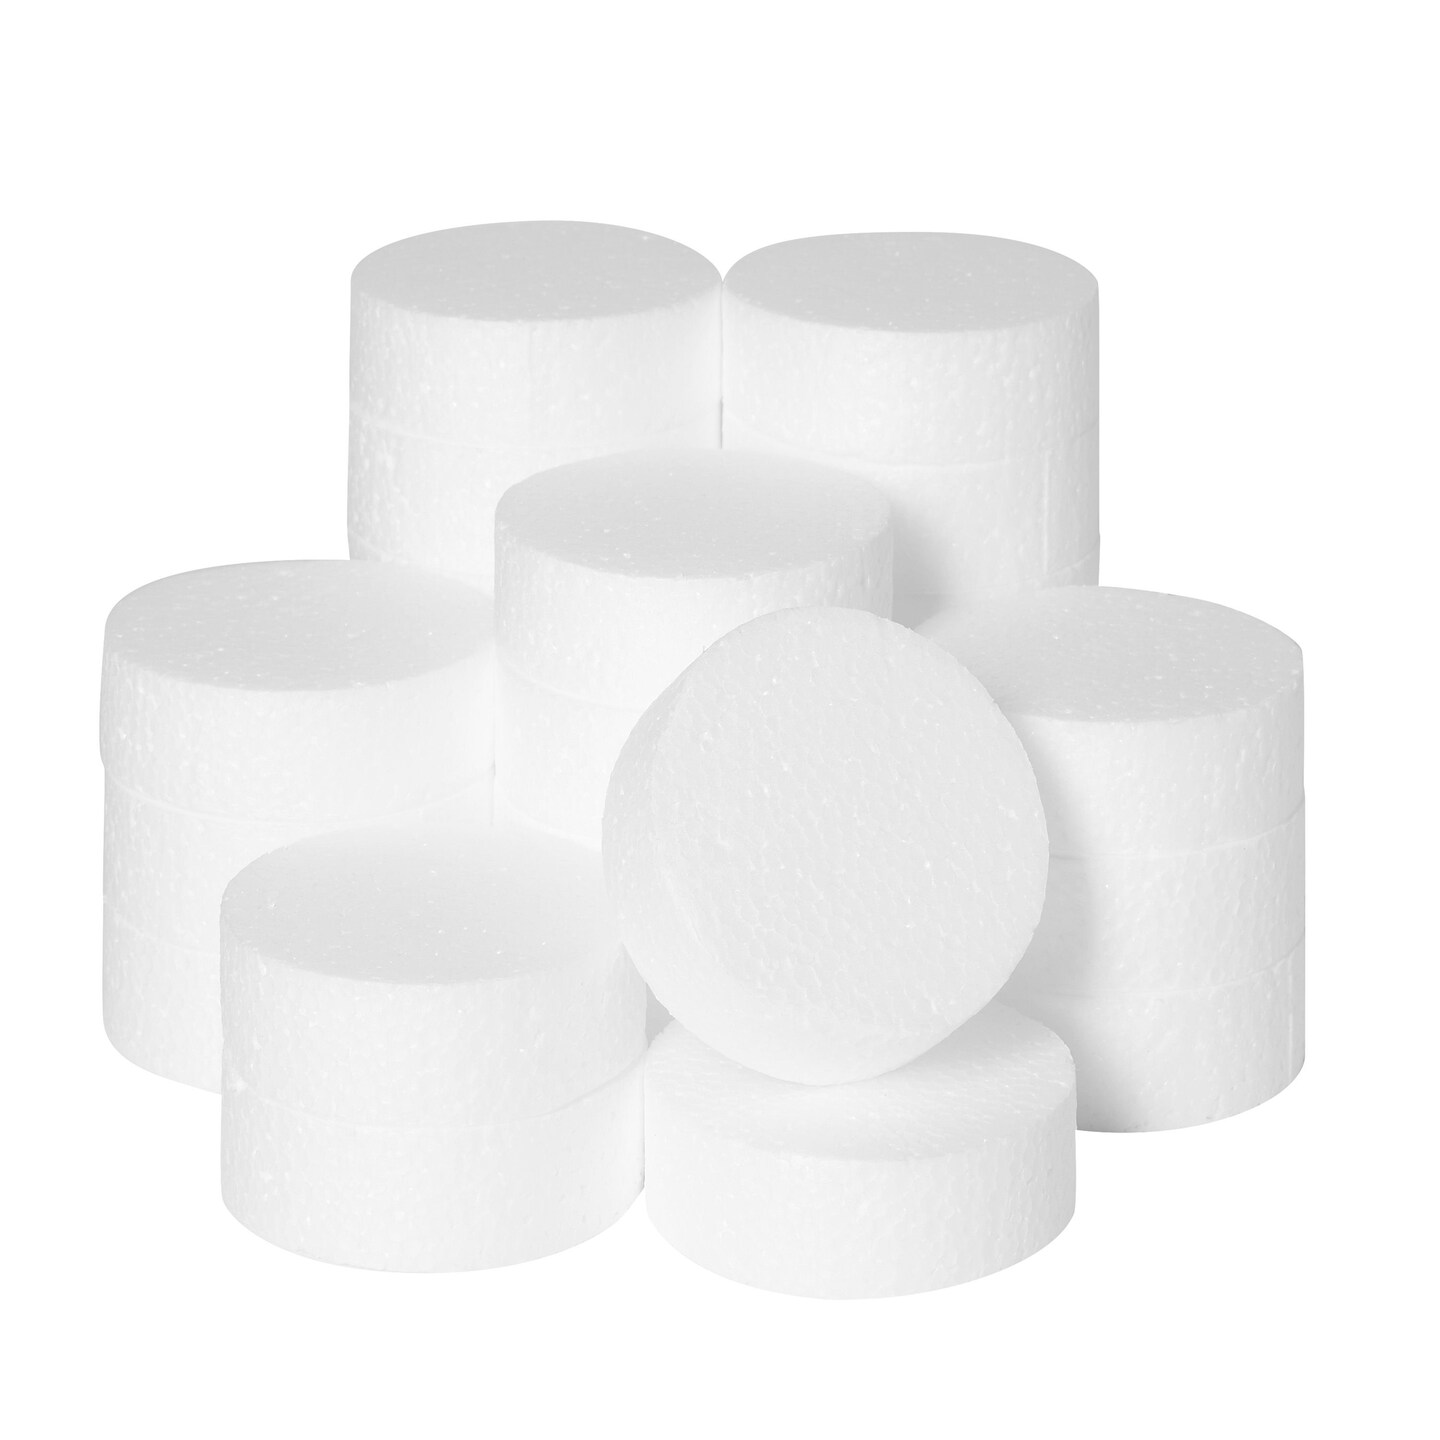 24 Pack Foam Circles for Crafts - 3 Inch Round Polystyrene Discs for